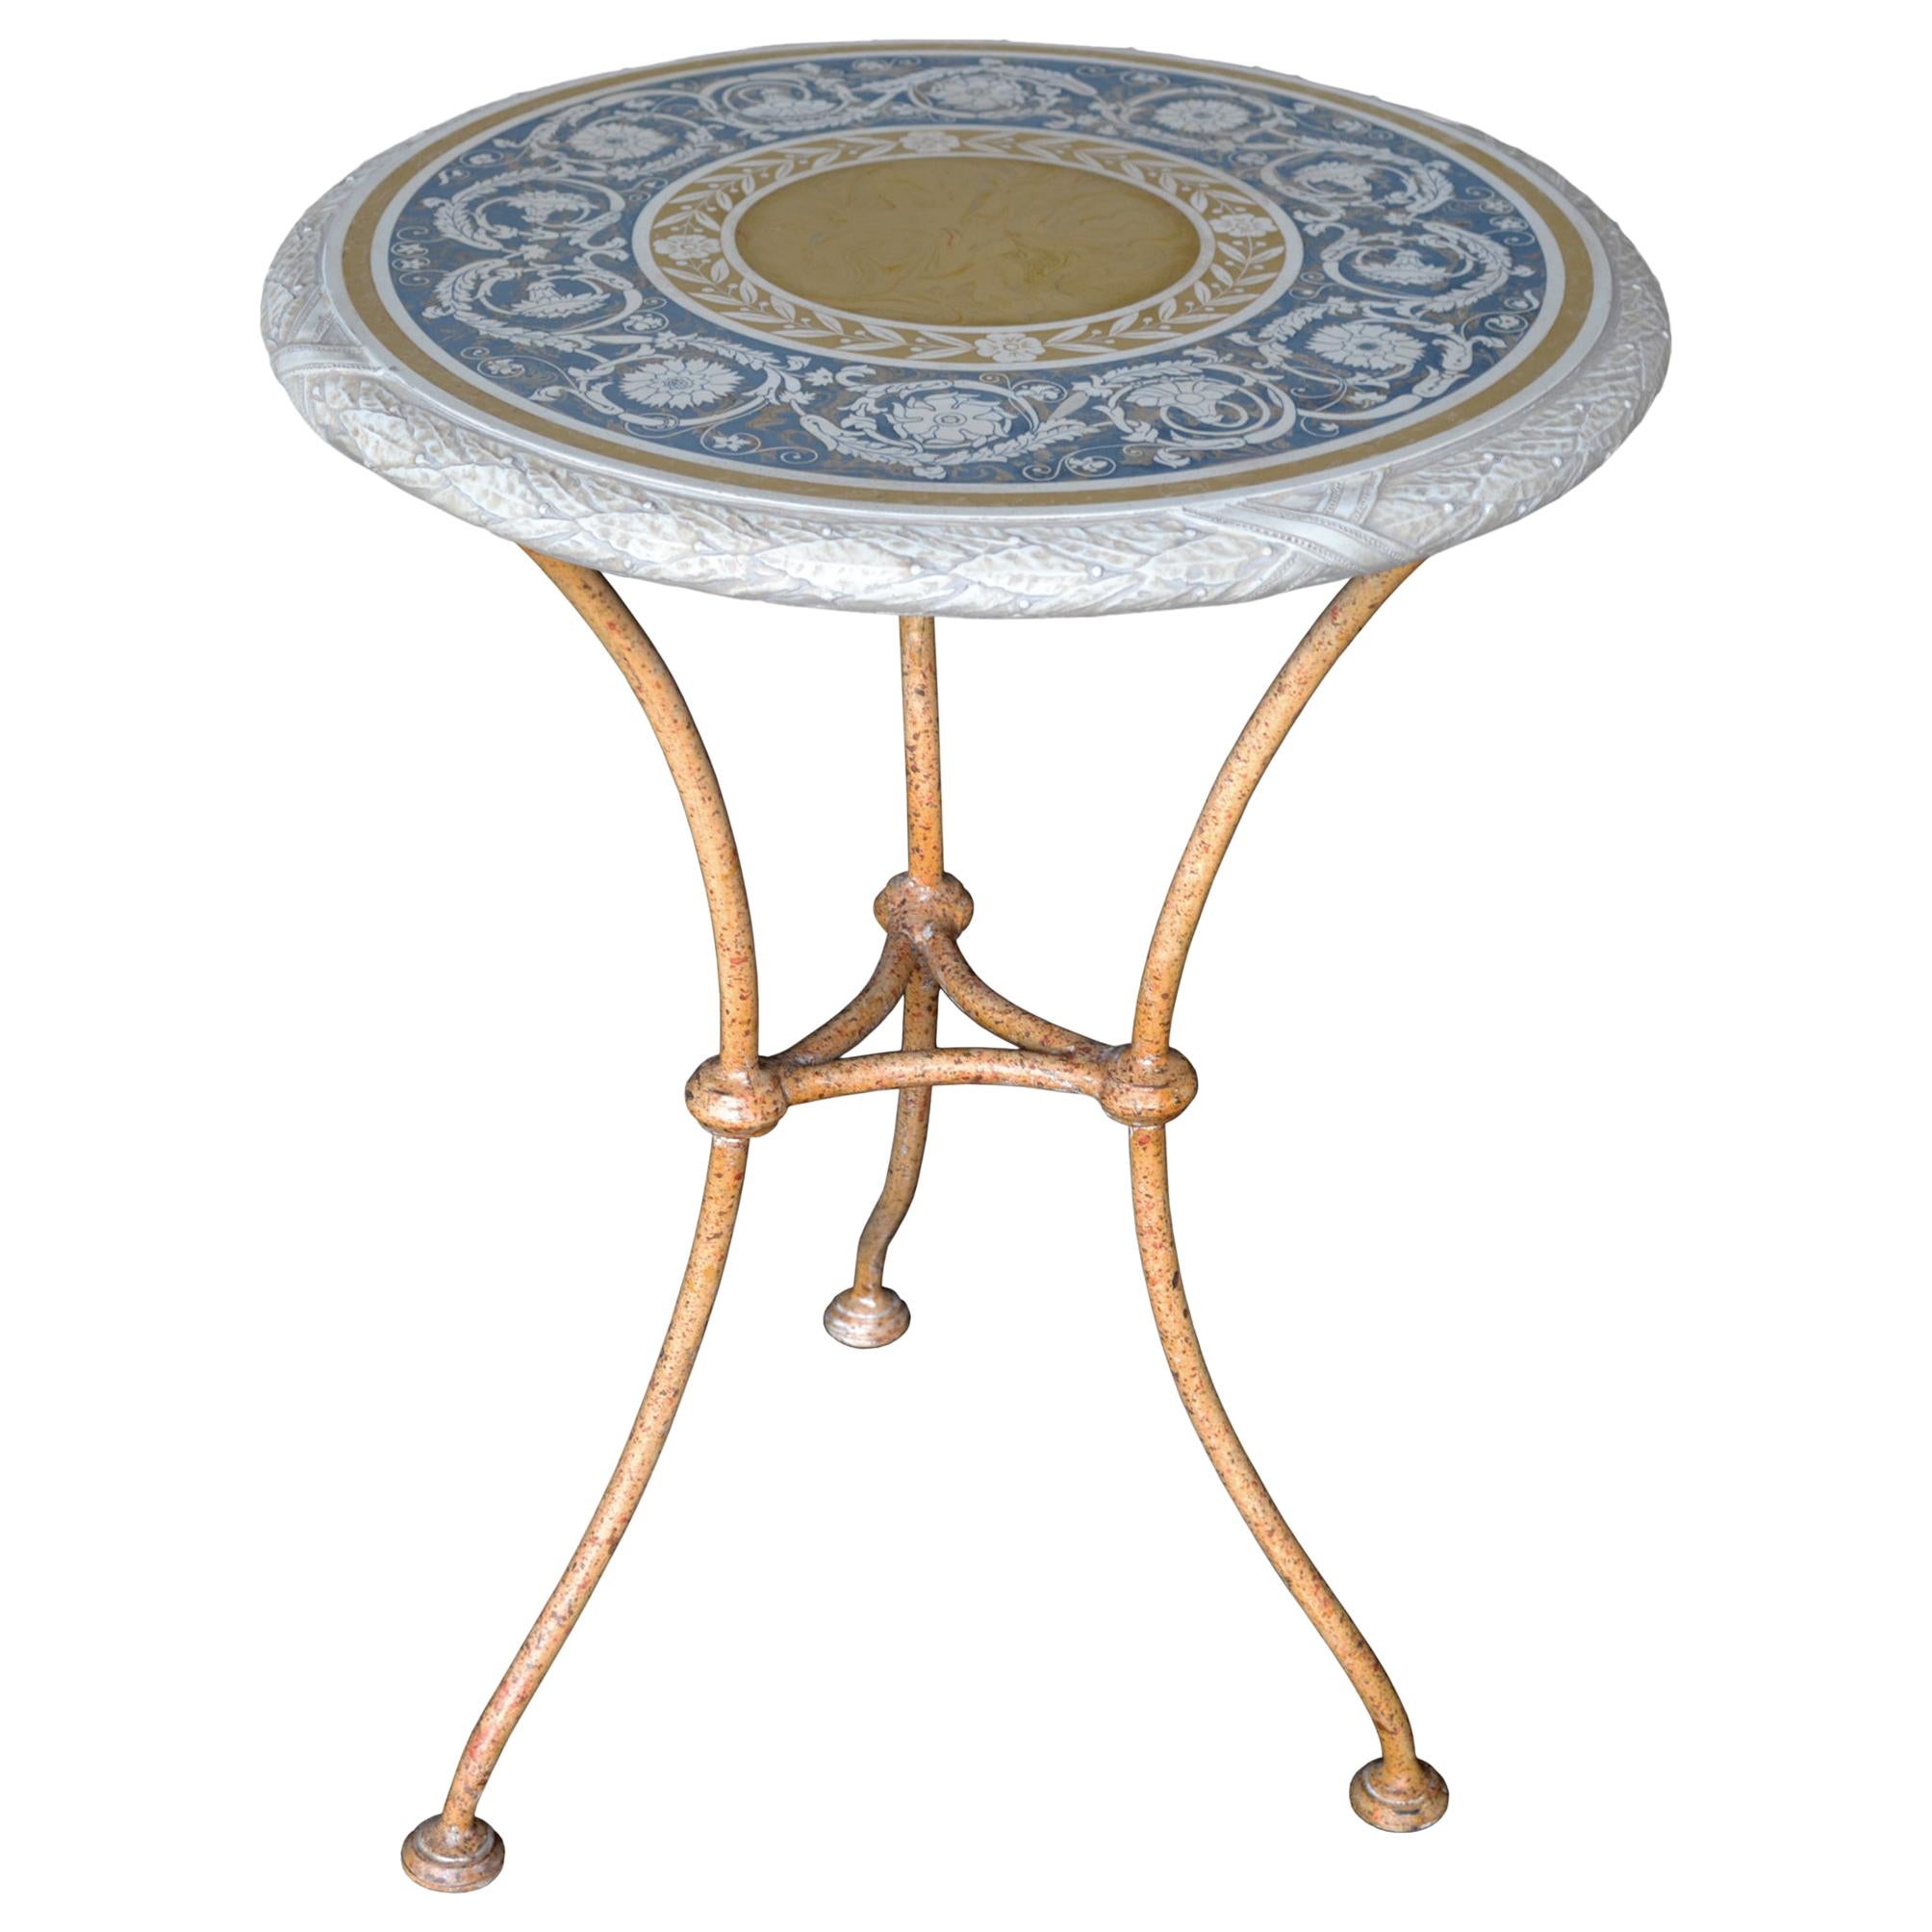 This table can be used as tea table, side table, lamp table it has multiple uses.
The top is manufactured in scagliola art inlay, same technique of the 